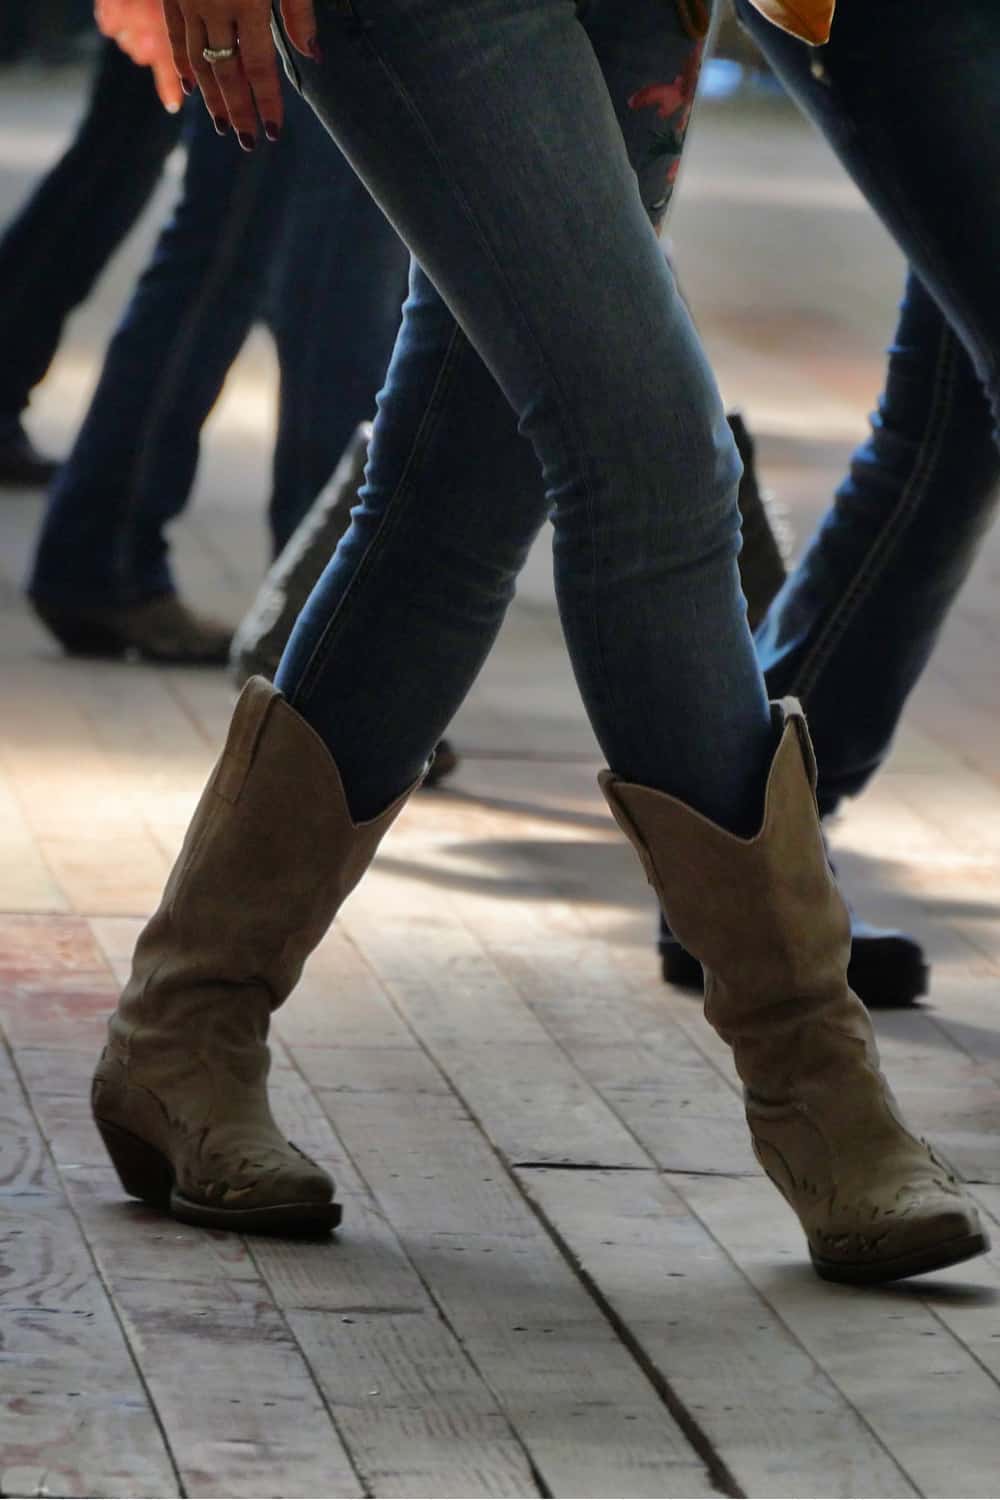 Do You Have To Be A Cowboy To Wear Cowboy Boots